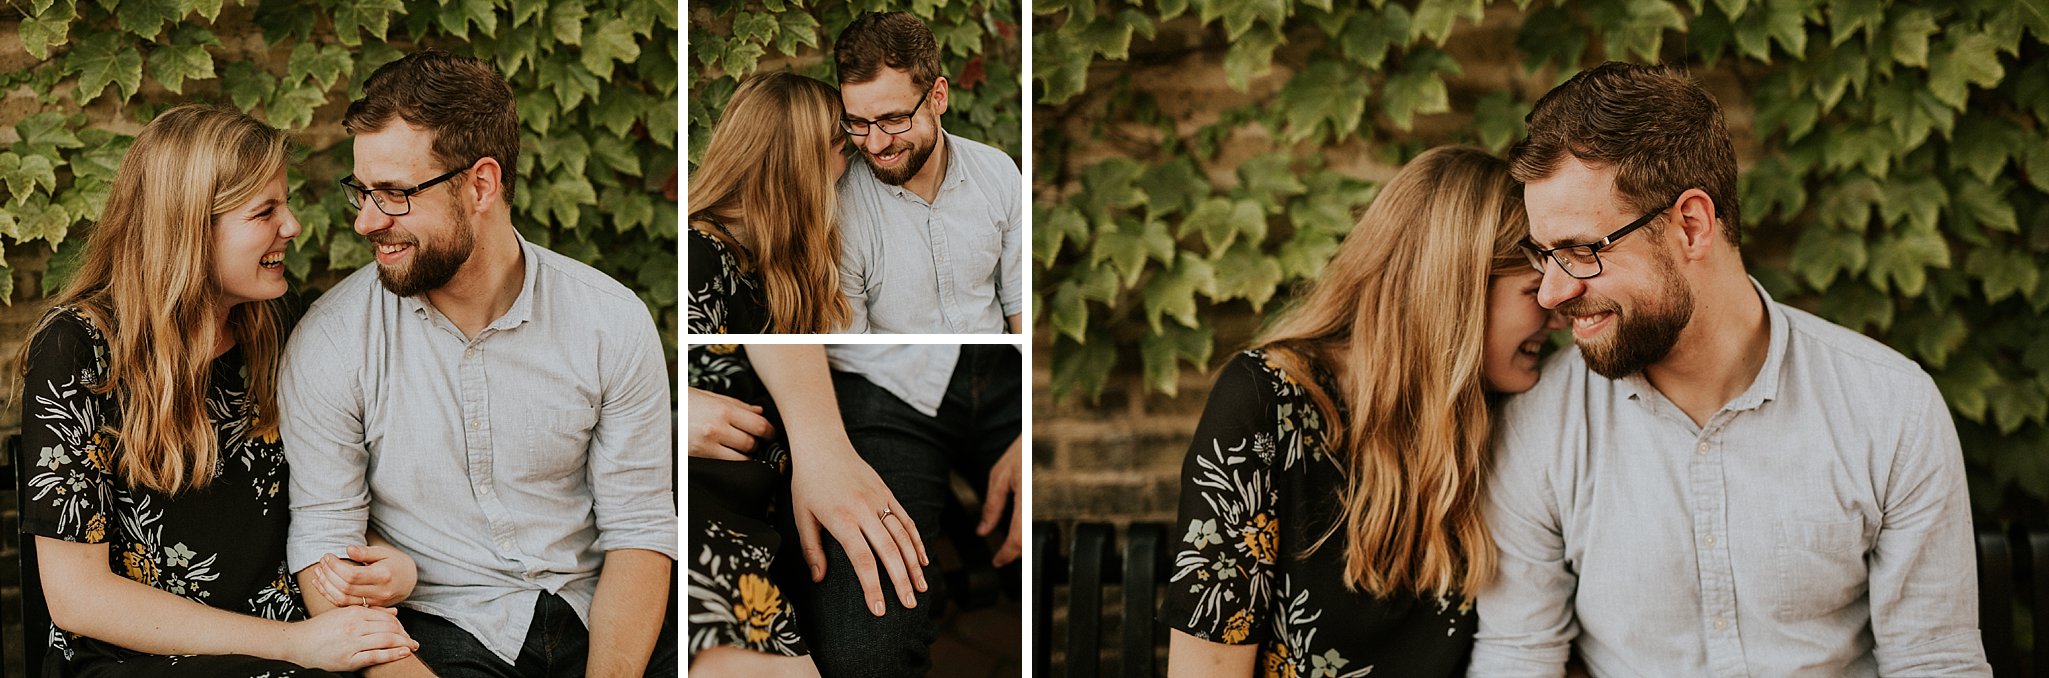 peter-katelyn_chicago-engagement-session_west-dundee-raceway-woods_0021.jpg